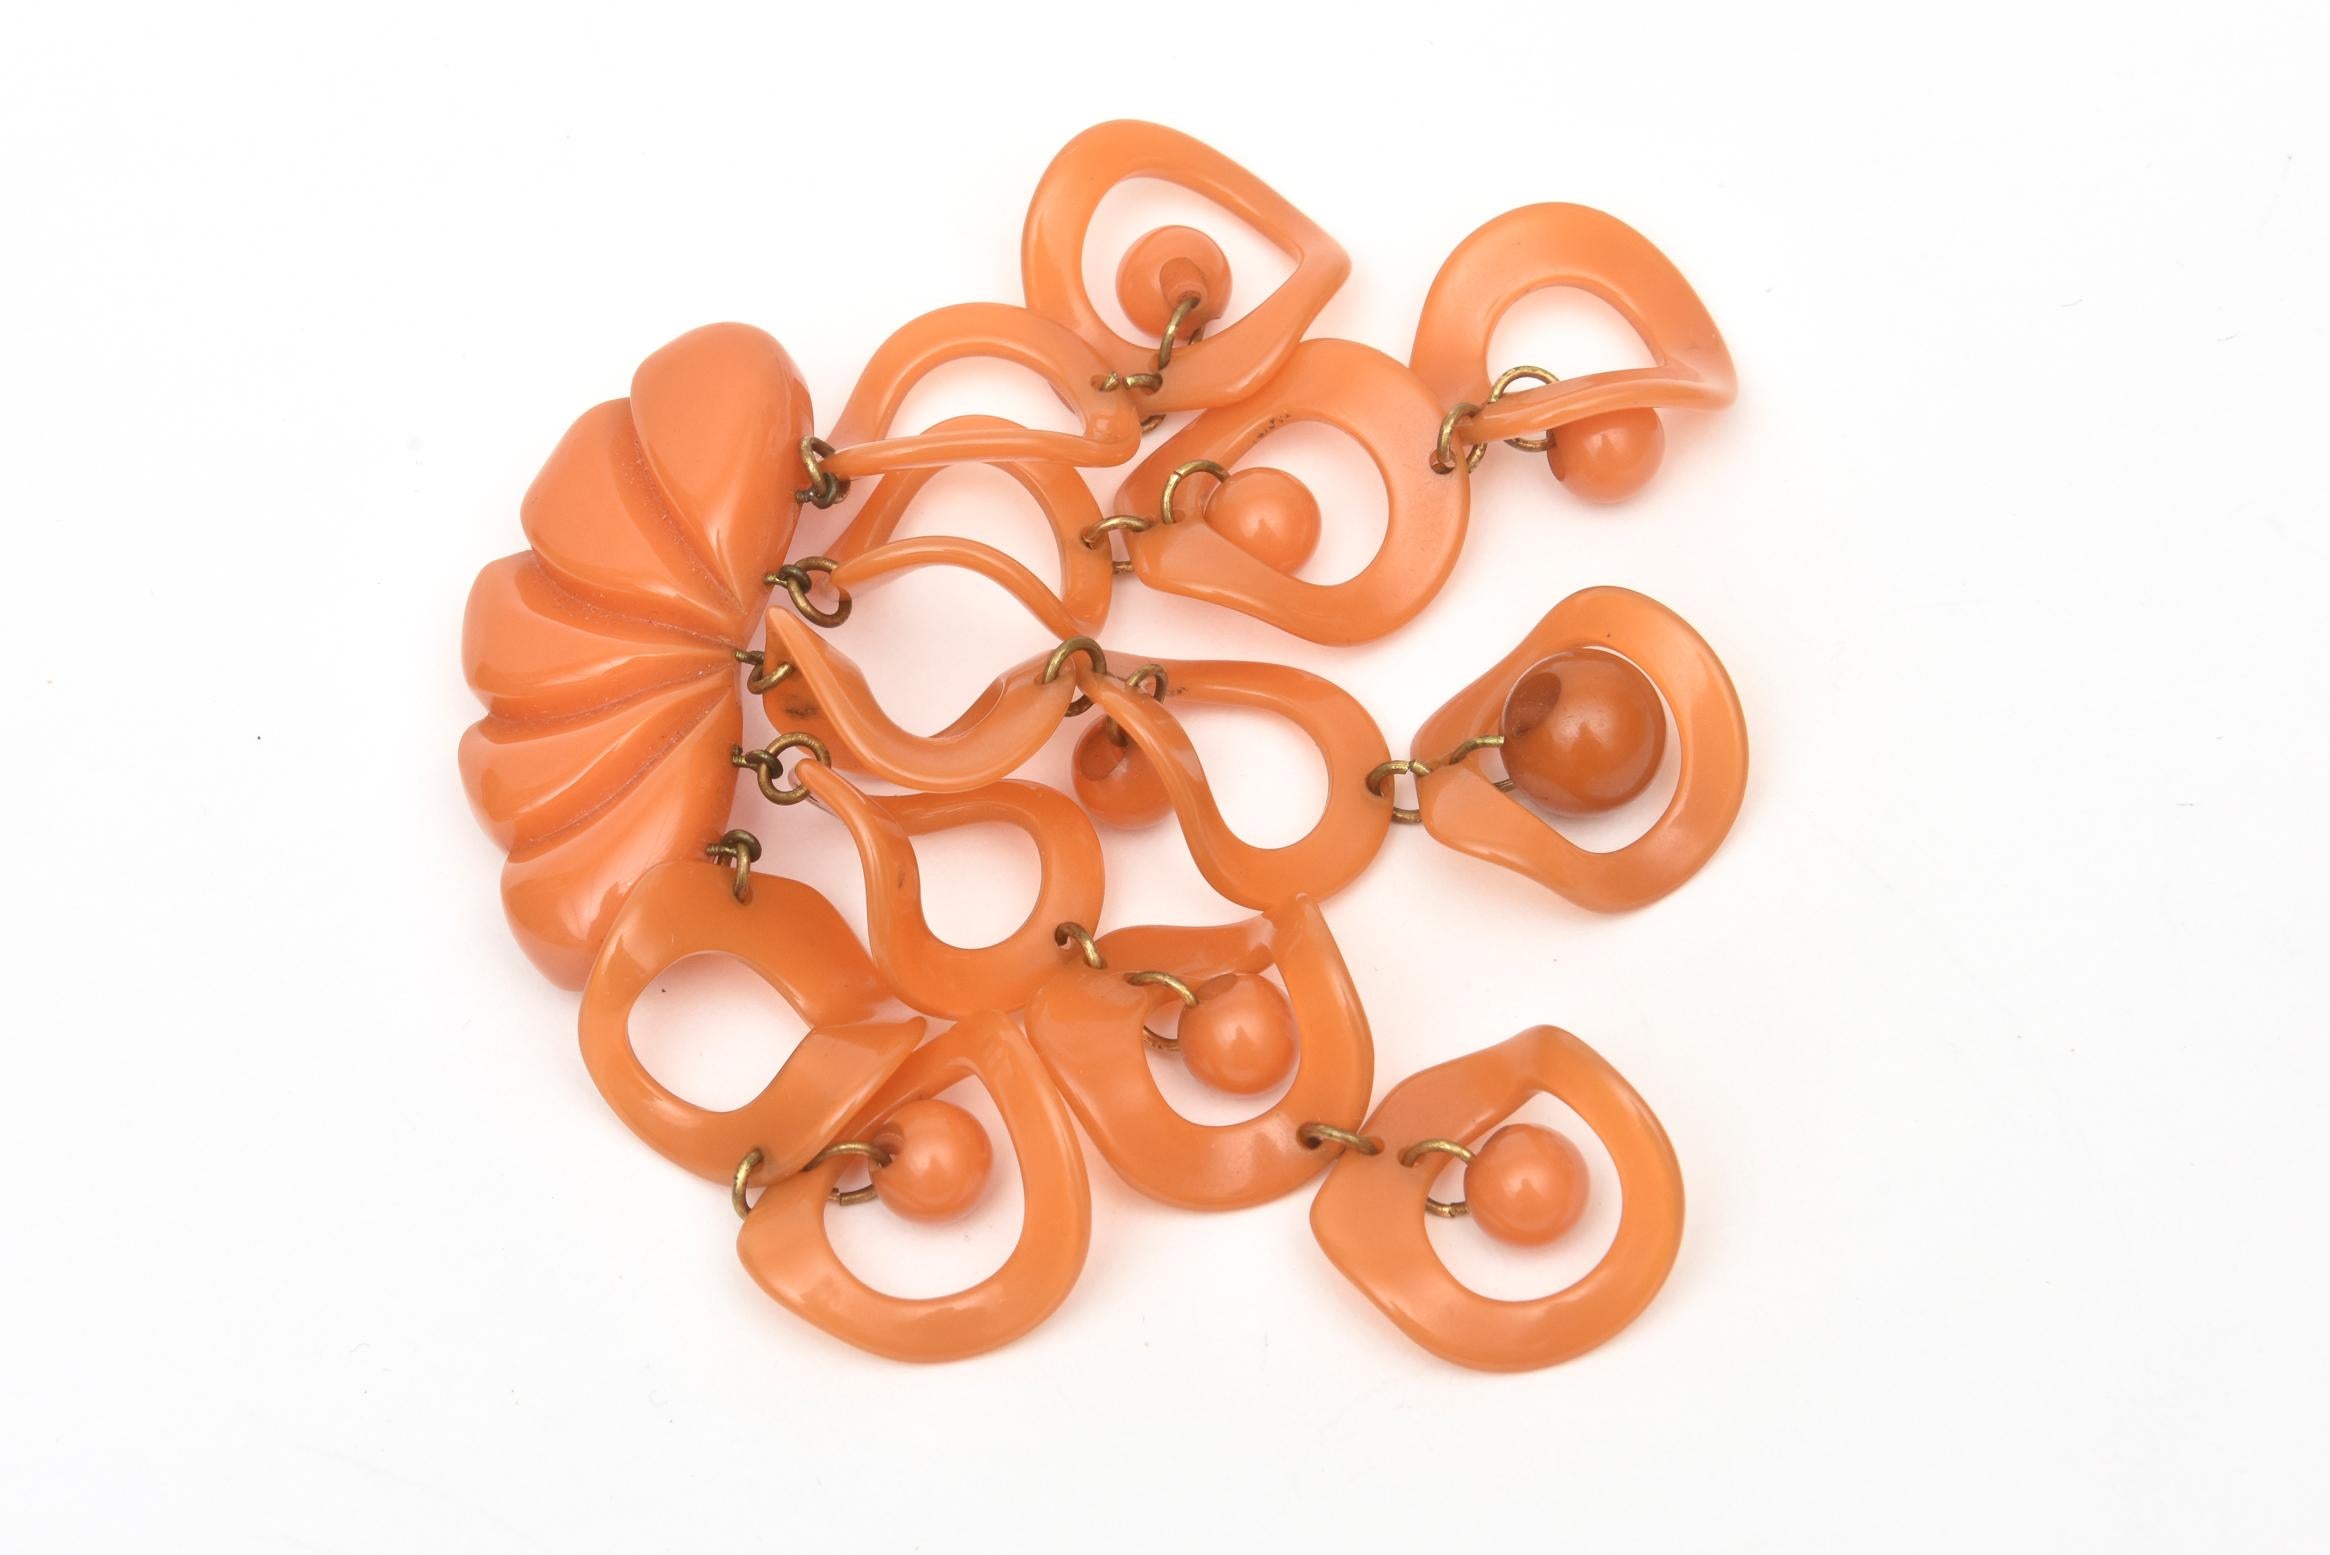 This special original vintage Art Deco orange bakelite dangler pin and or brooch is quite special and rare. It has great movement to it and the orange bakelite color is spectacular. It is from the 30's. There are 5 geometric danglers of circles and